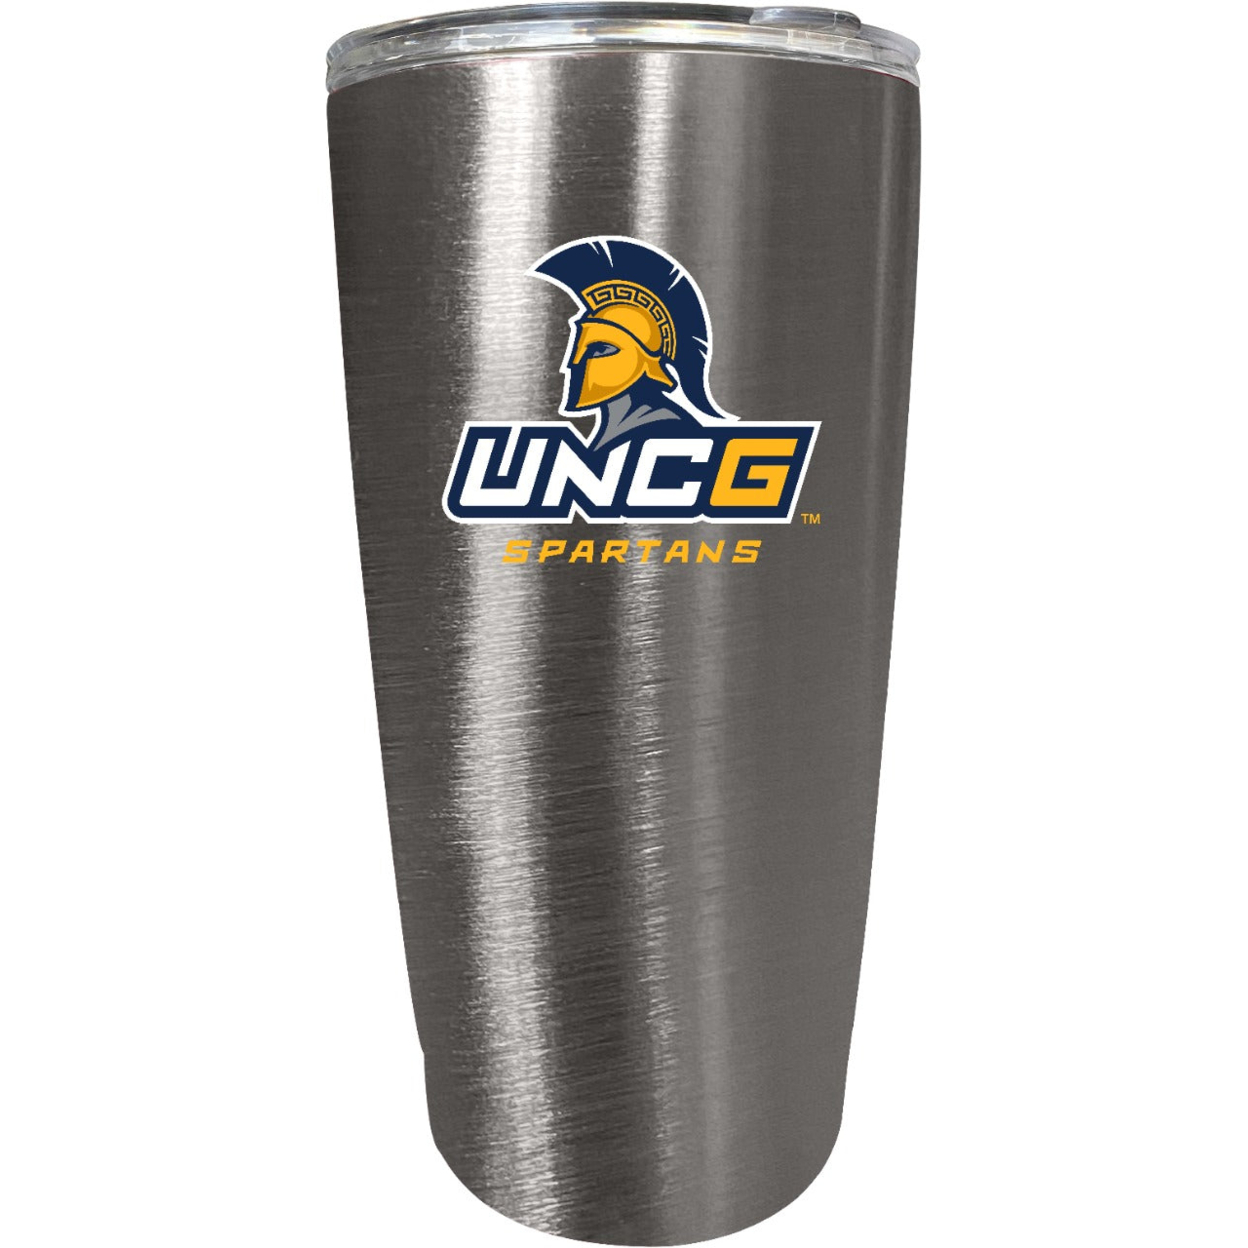 North Carolina Greensboro Spartans 16 Oz Insulated Stainless Steel Tumbler Colorless